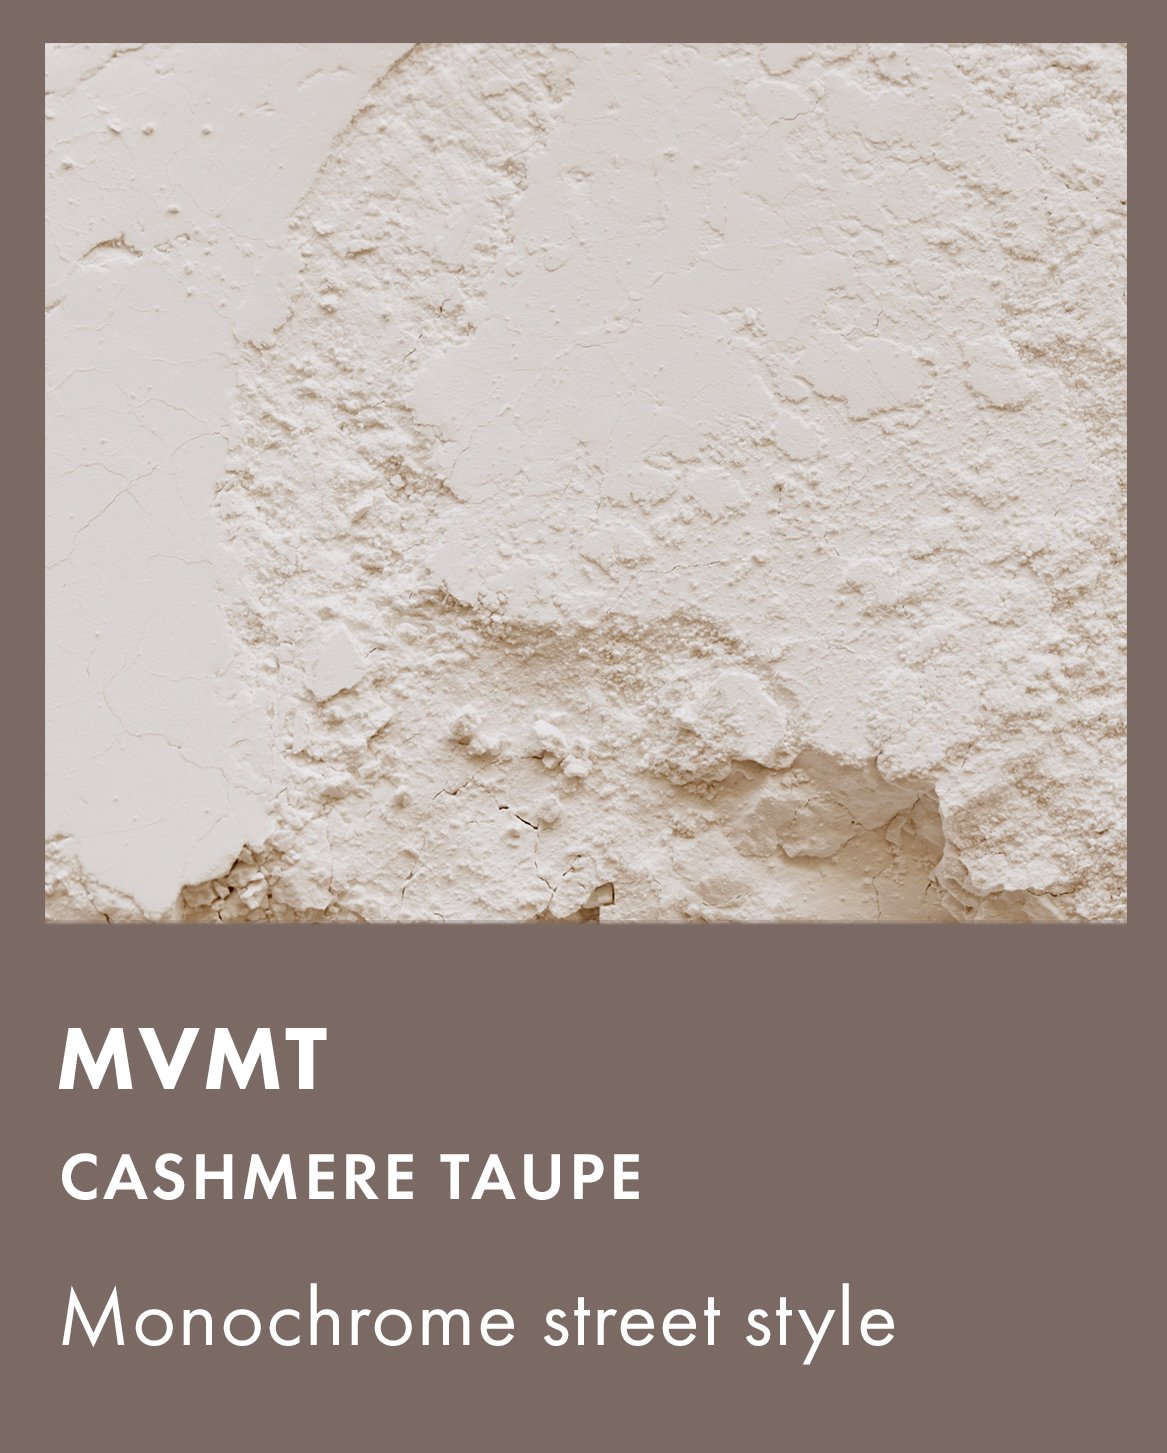 MVMT ceramic swatch in color cashmere taupe